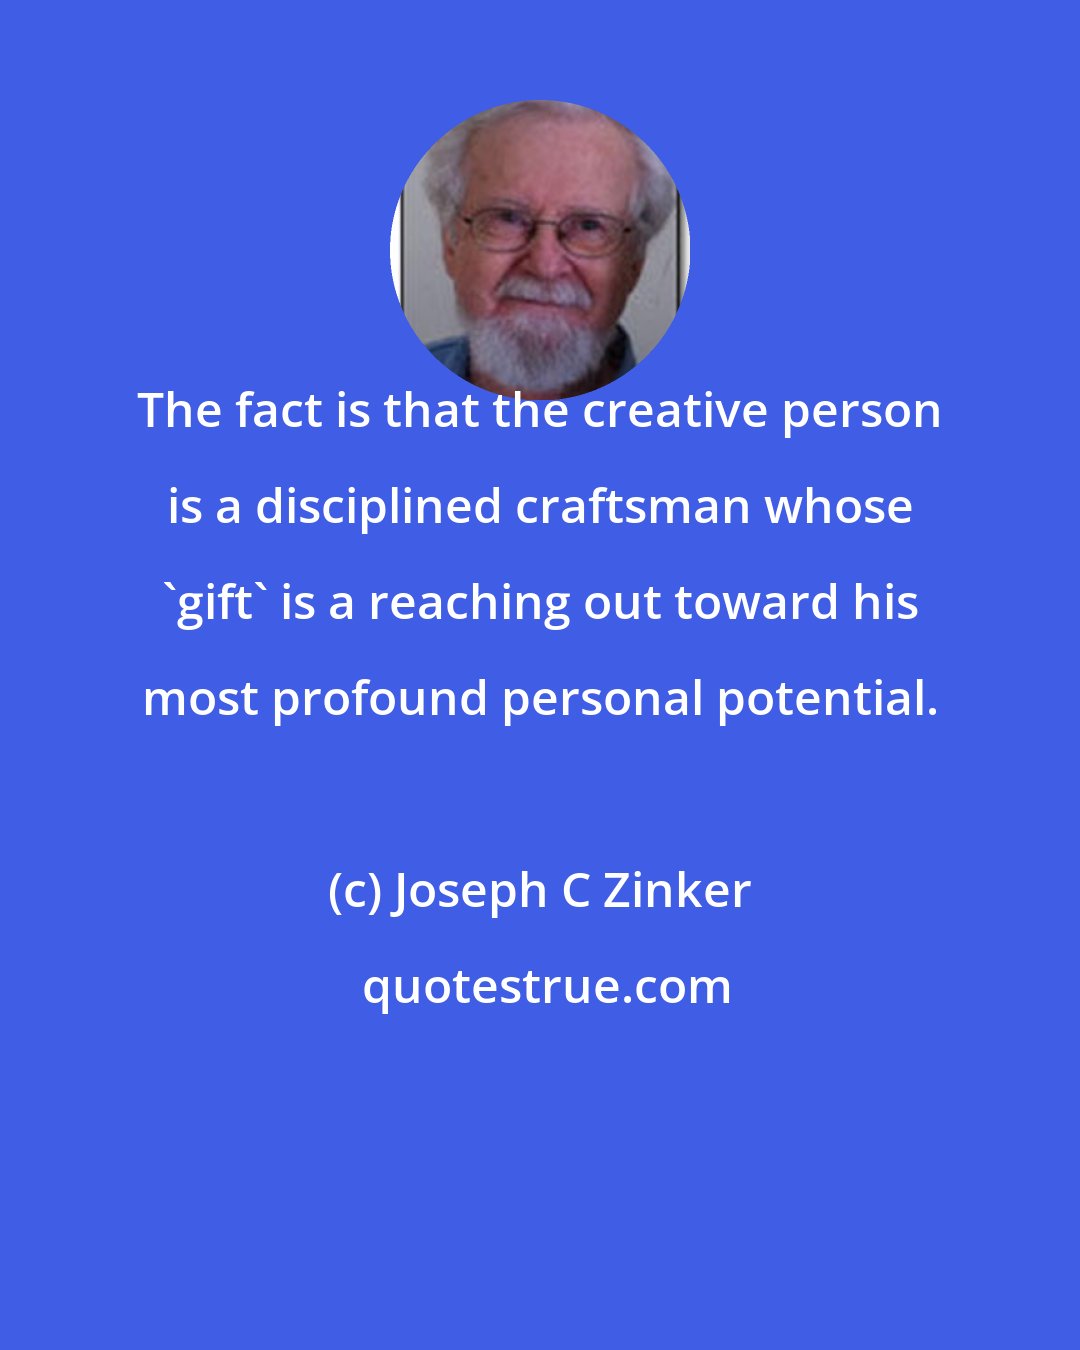 Joseph C Zinker: The fact is that the creative person is a disciplined craftsman whose 'gift' is a reaching out toward his most profound personal potential.